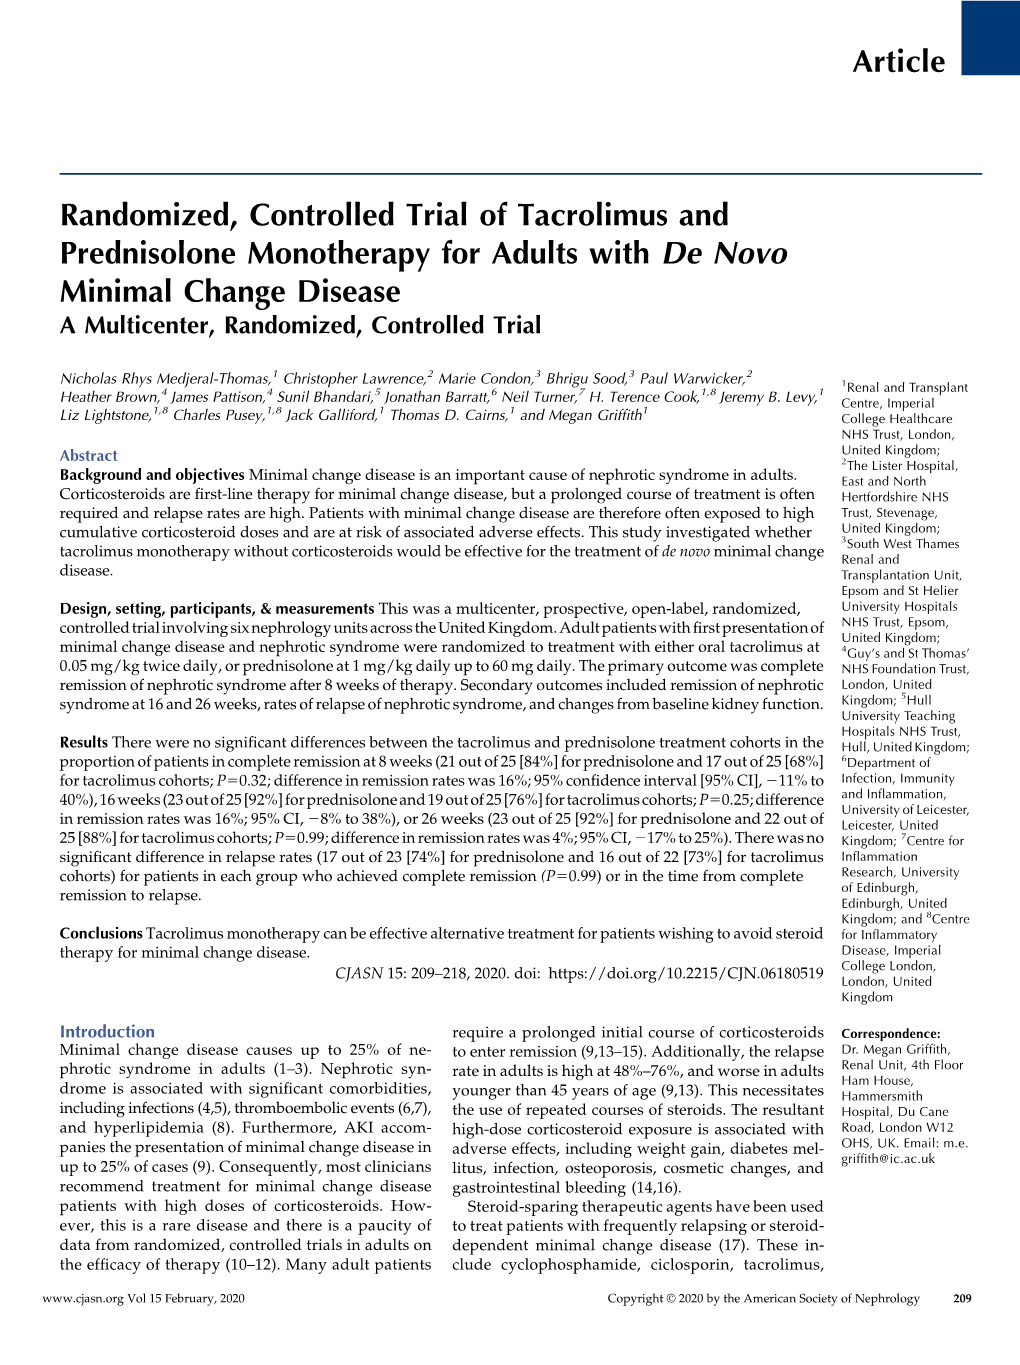 Article Randomized, Controlled Trial of Tacrolimus and Prednisolone